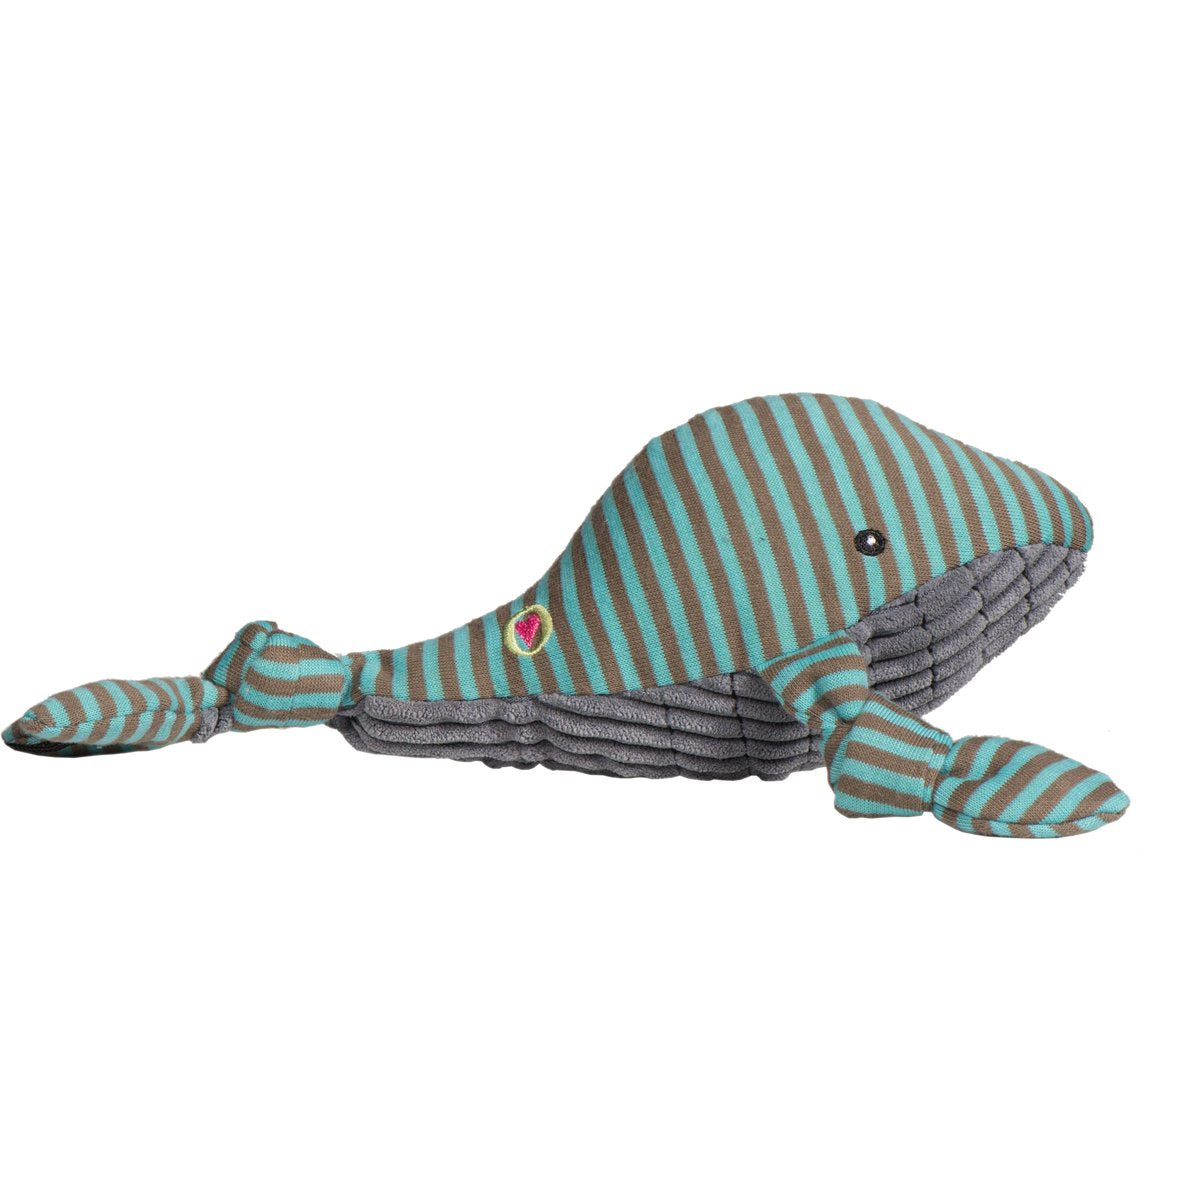 HuggleHounds Knottie Durable Squeaky Plush Dog Toy, Whale